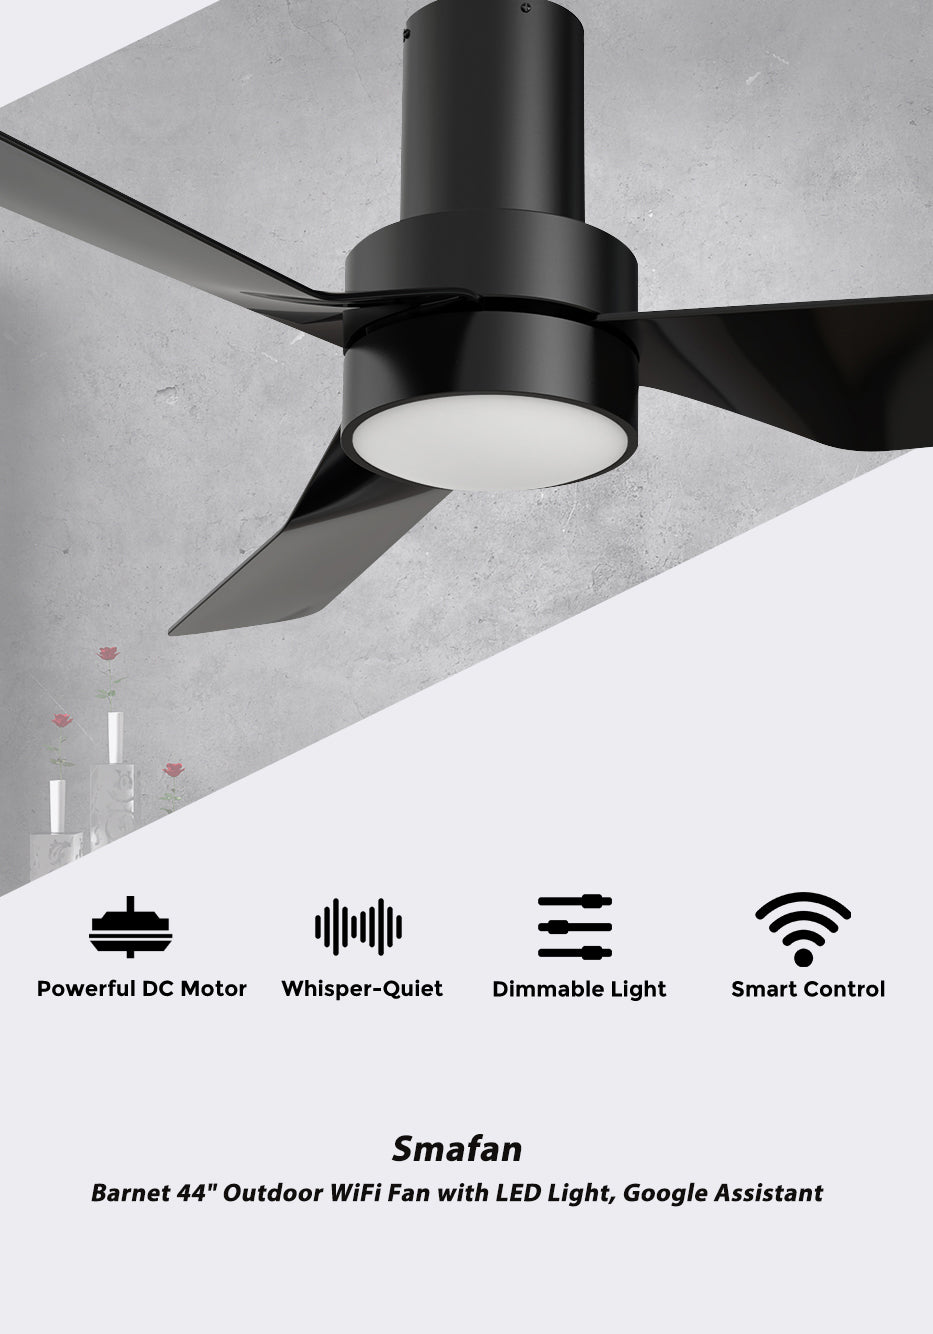 Carro-Smafan-Barnet-44''-Indoor-Outdoor-WiFi-Ceiling-Fan-with-Dimmable-LED-Light-Kit-Works-with-Amazon-Alexa.